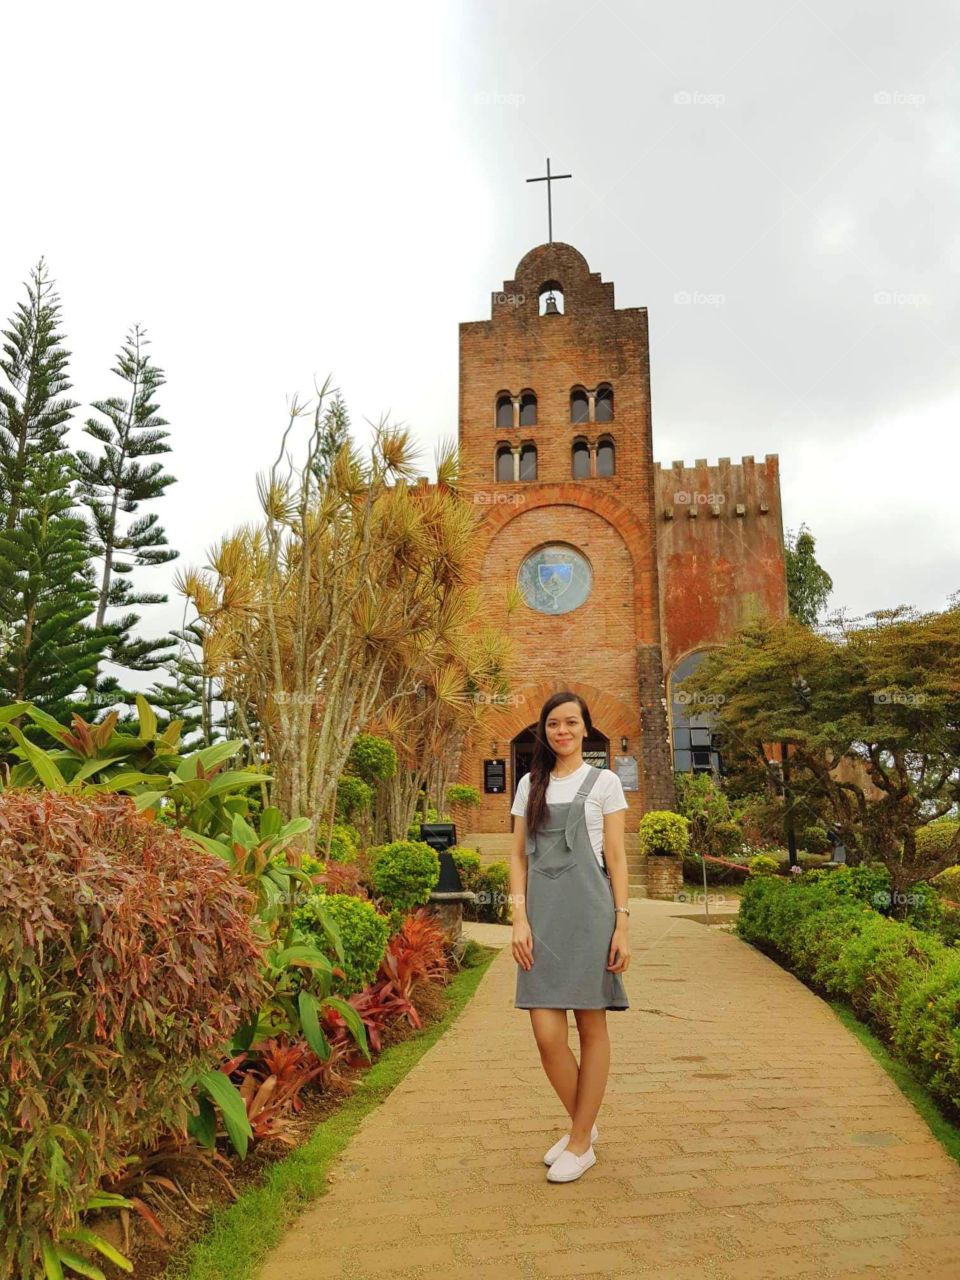 Front view of old Caleruega Church in Phillipines. This Church is too small yet worth every praise due to its quality architecture and style.